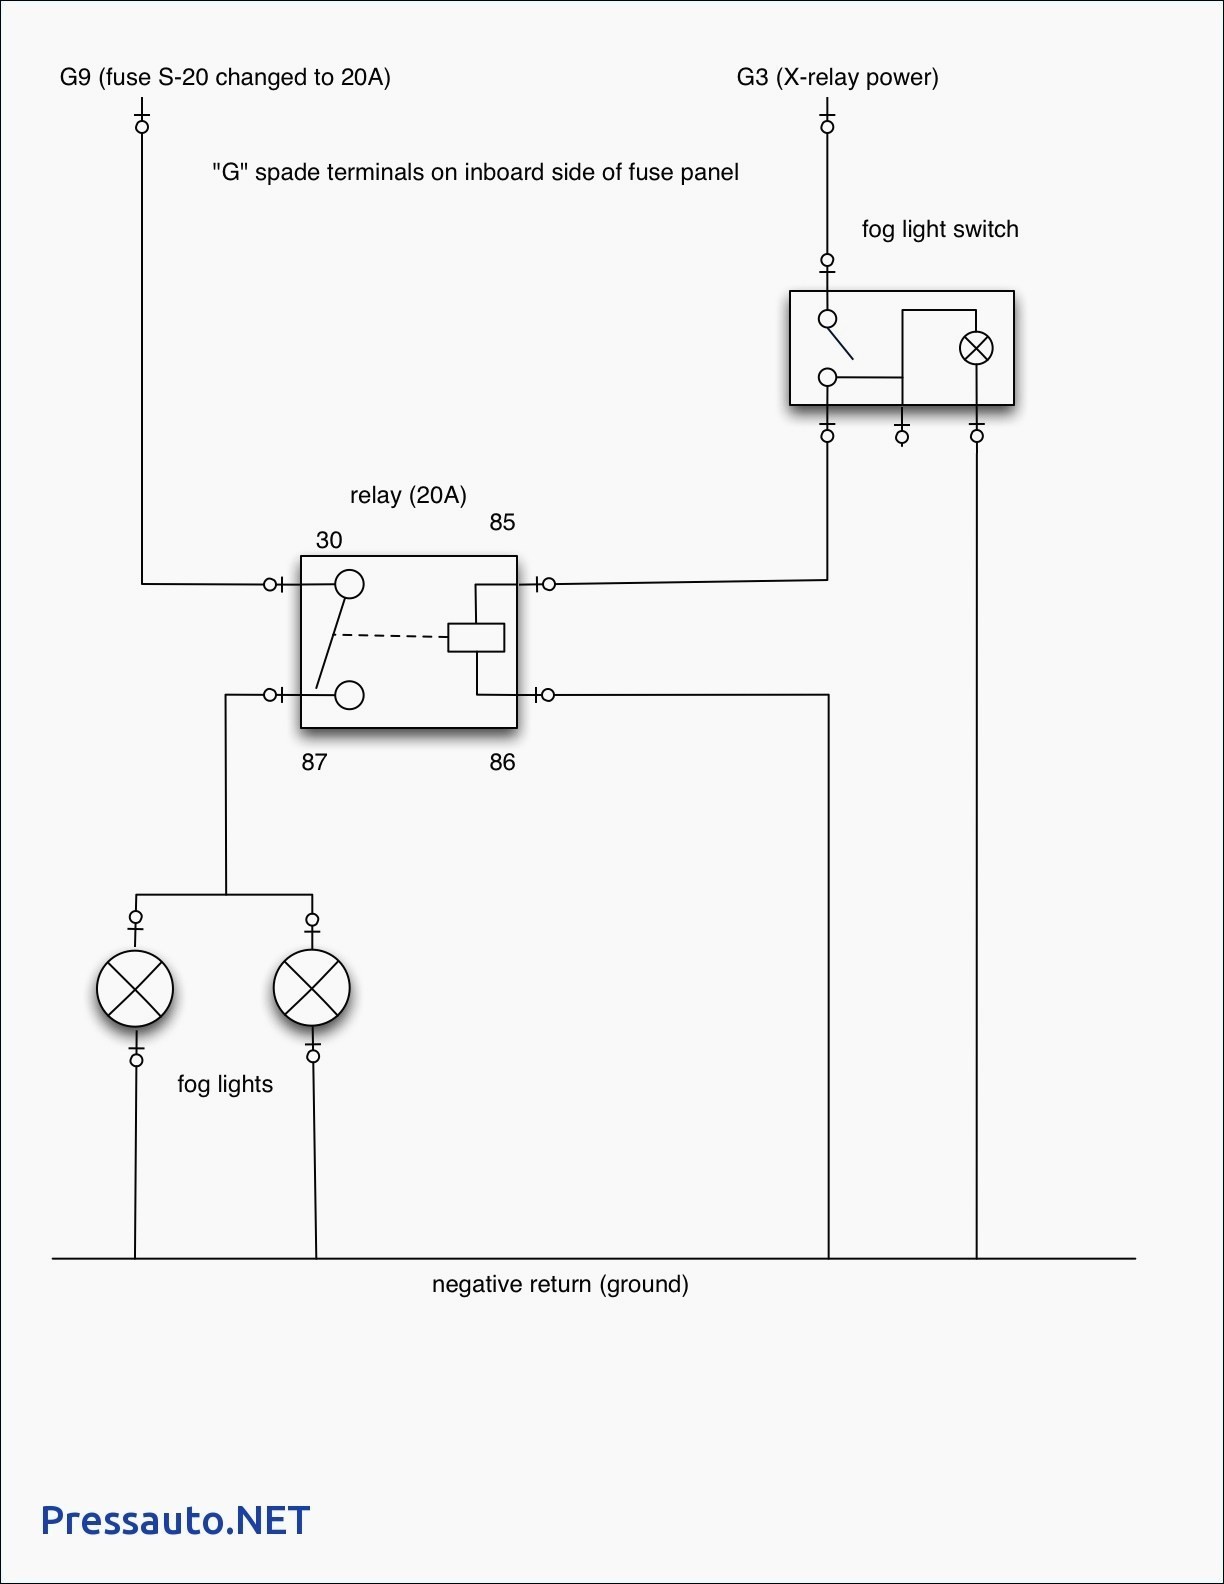 Fog Light Wiring Diagram No Relay New Wiring Diagram for A Relay for Fog Lights Save